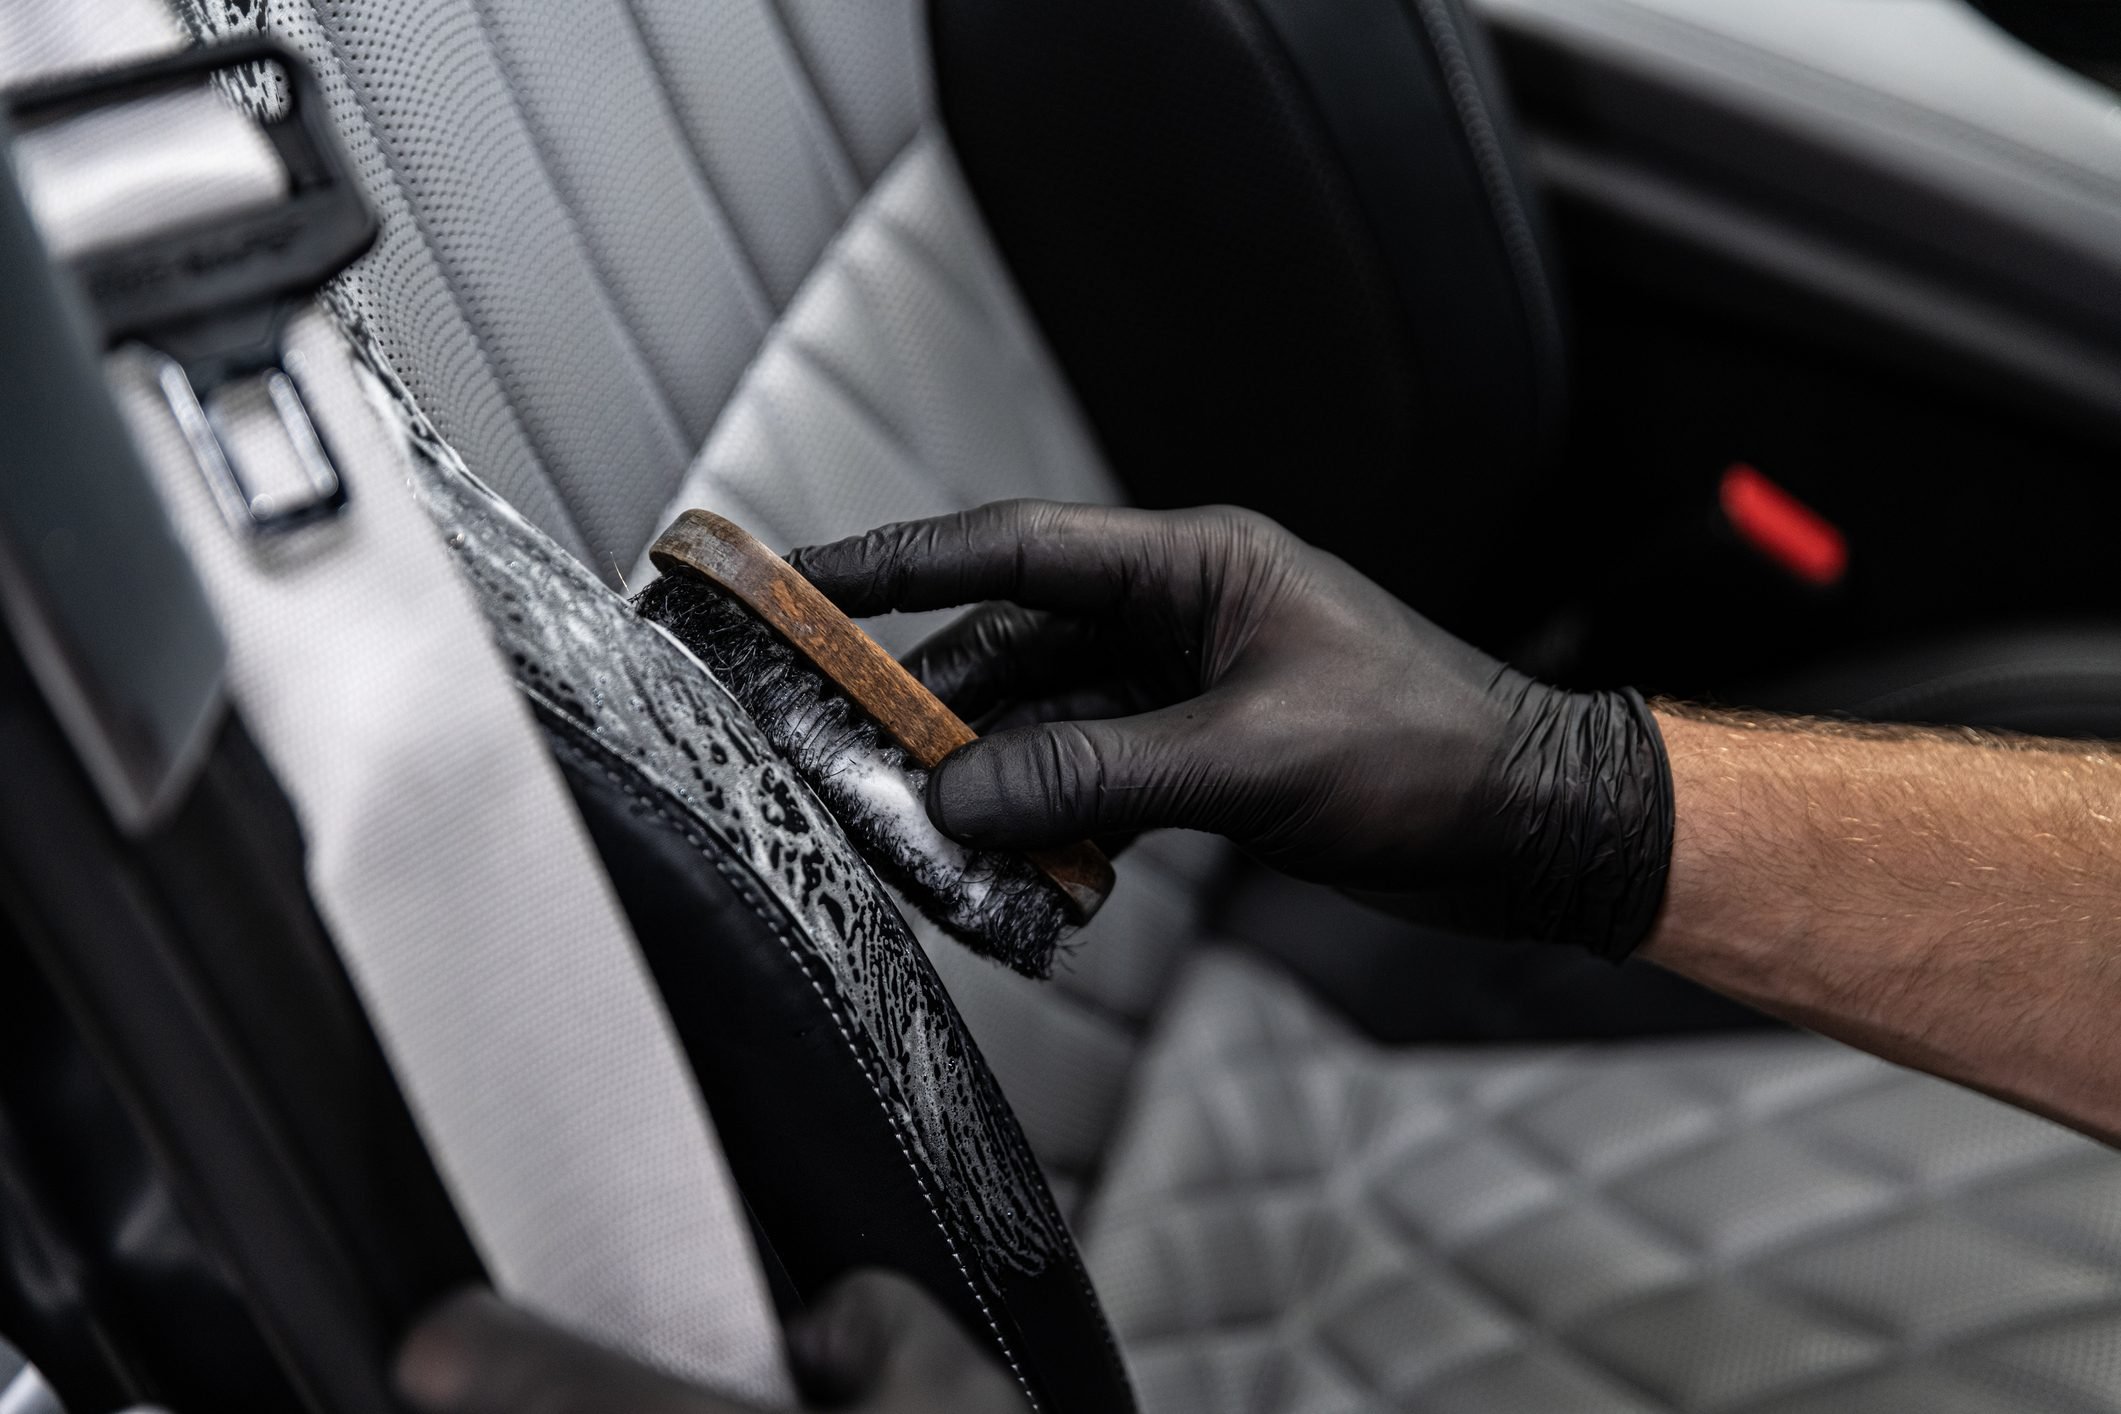 Can This Cheap Glass Cleaner Get Stains Out of Your Car's Upholstery?